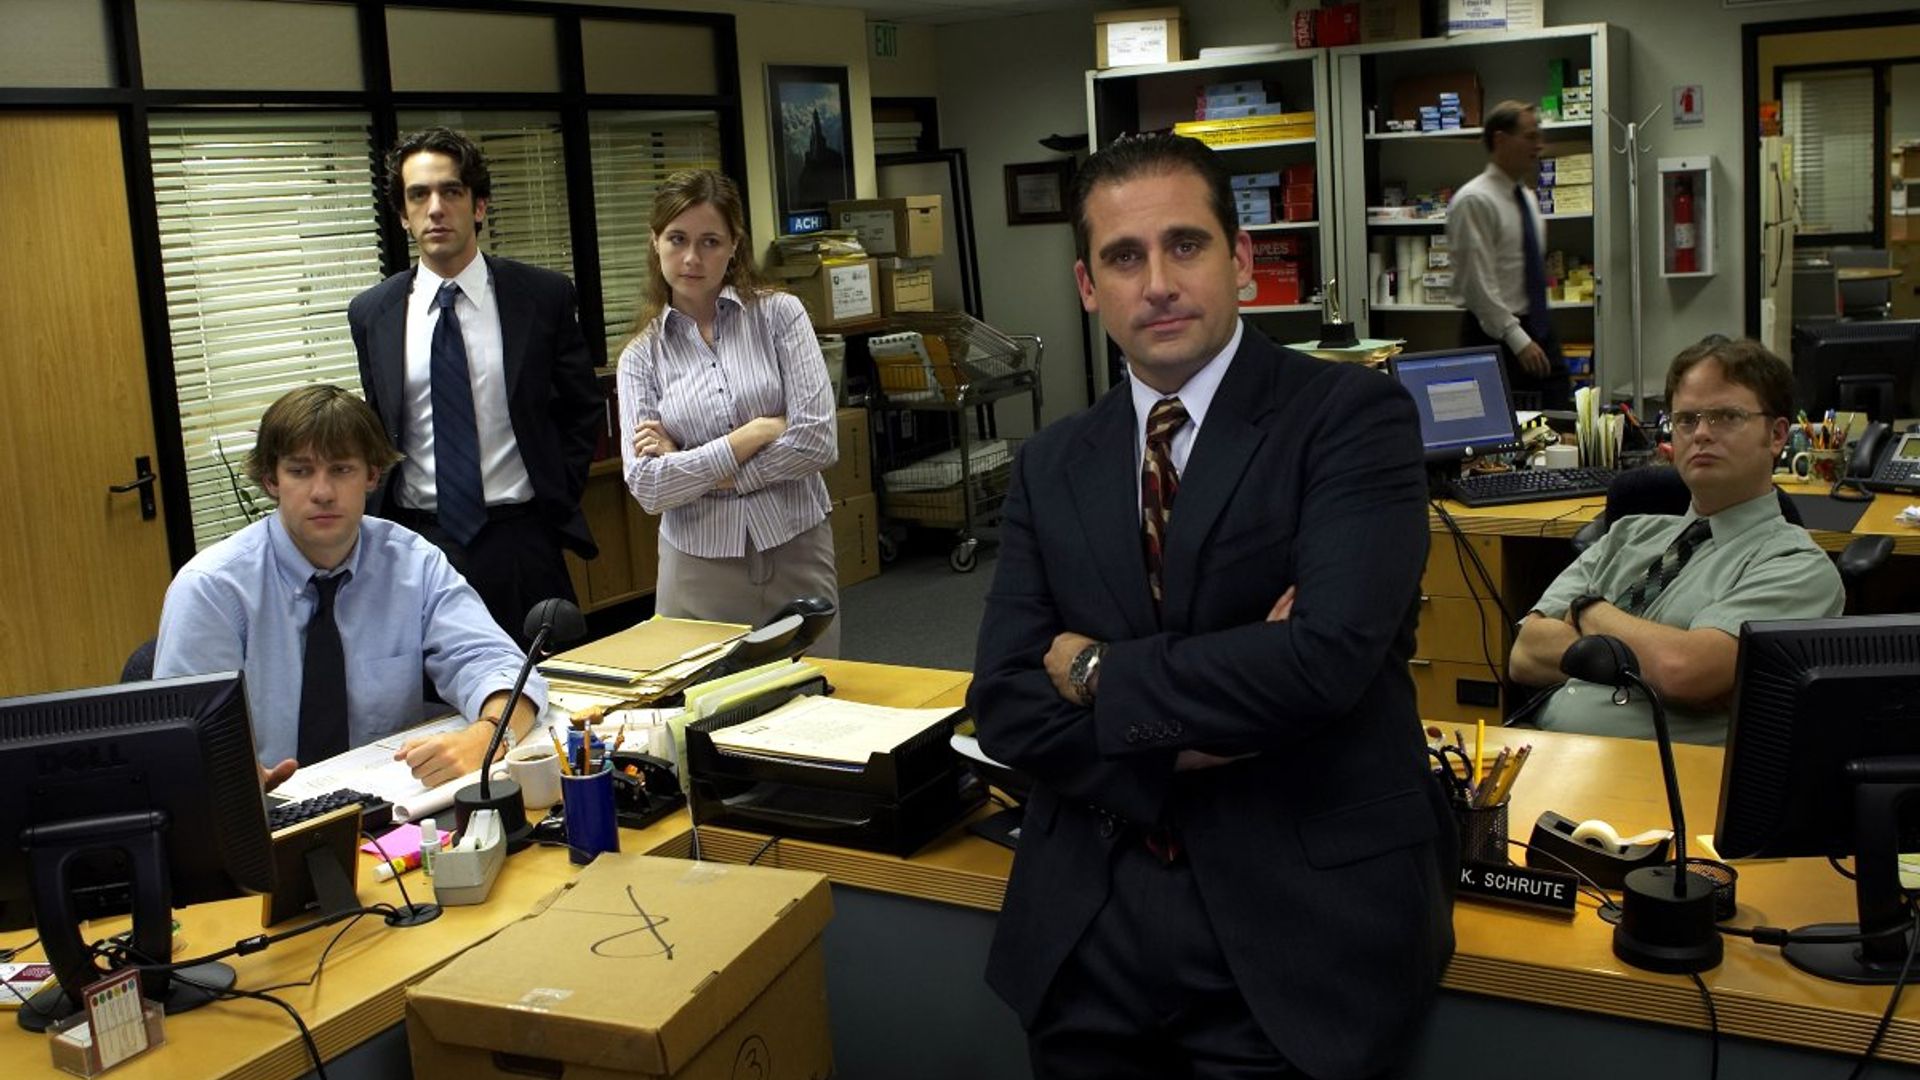 the office 1